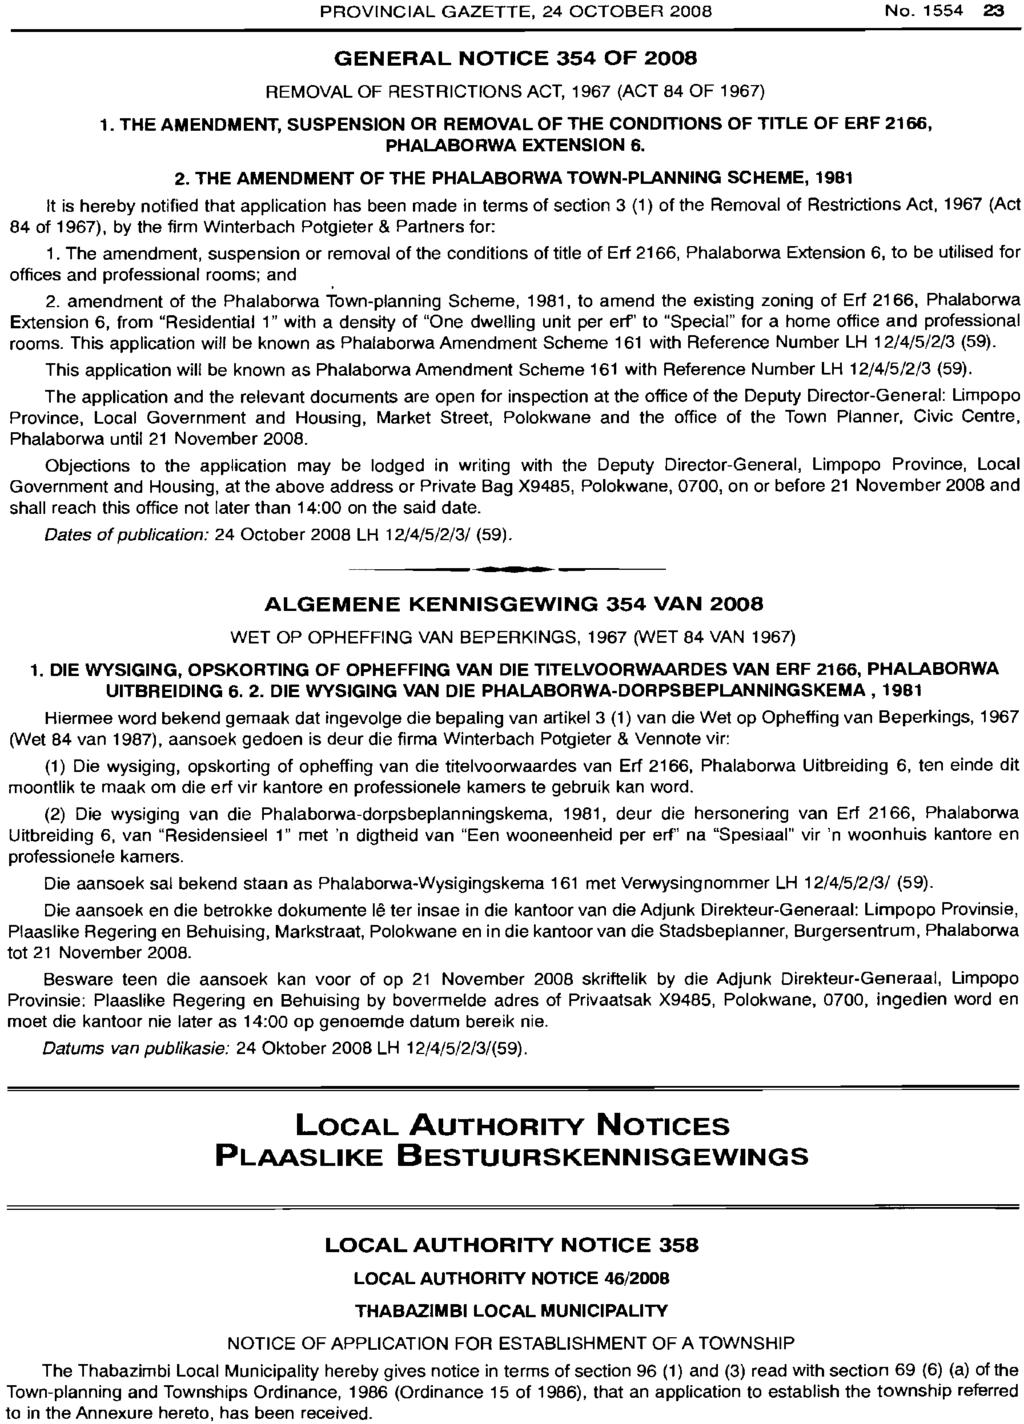 PROVINCIAL GAZETTE, 24 OCTOBER 2008 No.1554 23 GENERAL NOTICE 354 OF 2008 REMOVAL OF RESTRICTIONS ACT, 1967 (ACT 84 OF 1967) 1.